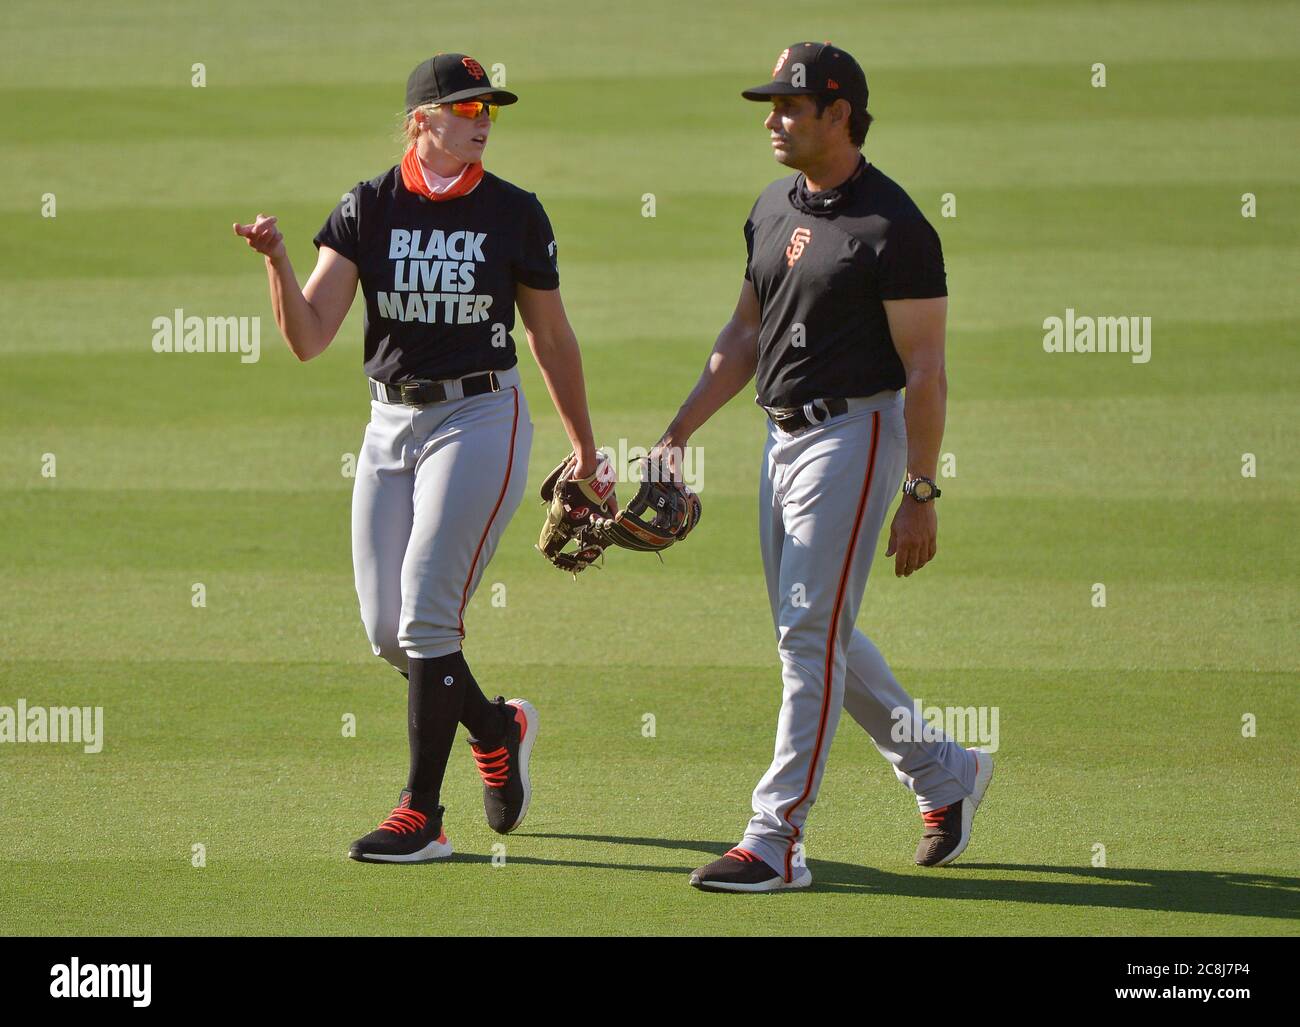 Los Angeles, United States. 24th July, 2020. San Francisco Giants first  base coach Alyssa Nakken (L) participates in a pre-game workout with the  Los Angeles Dodgers at Dodger Stadium in Los Angeles